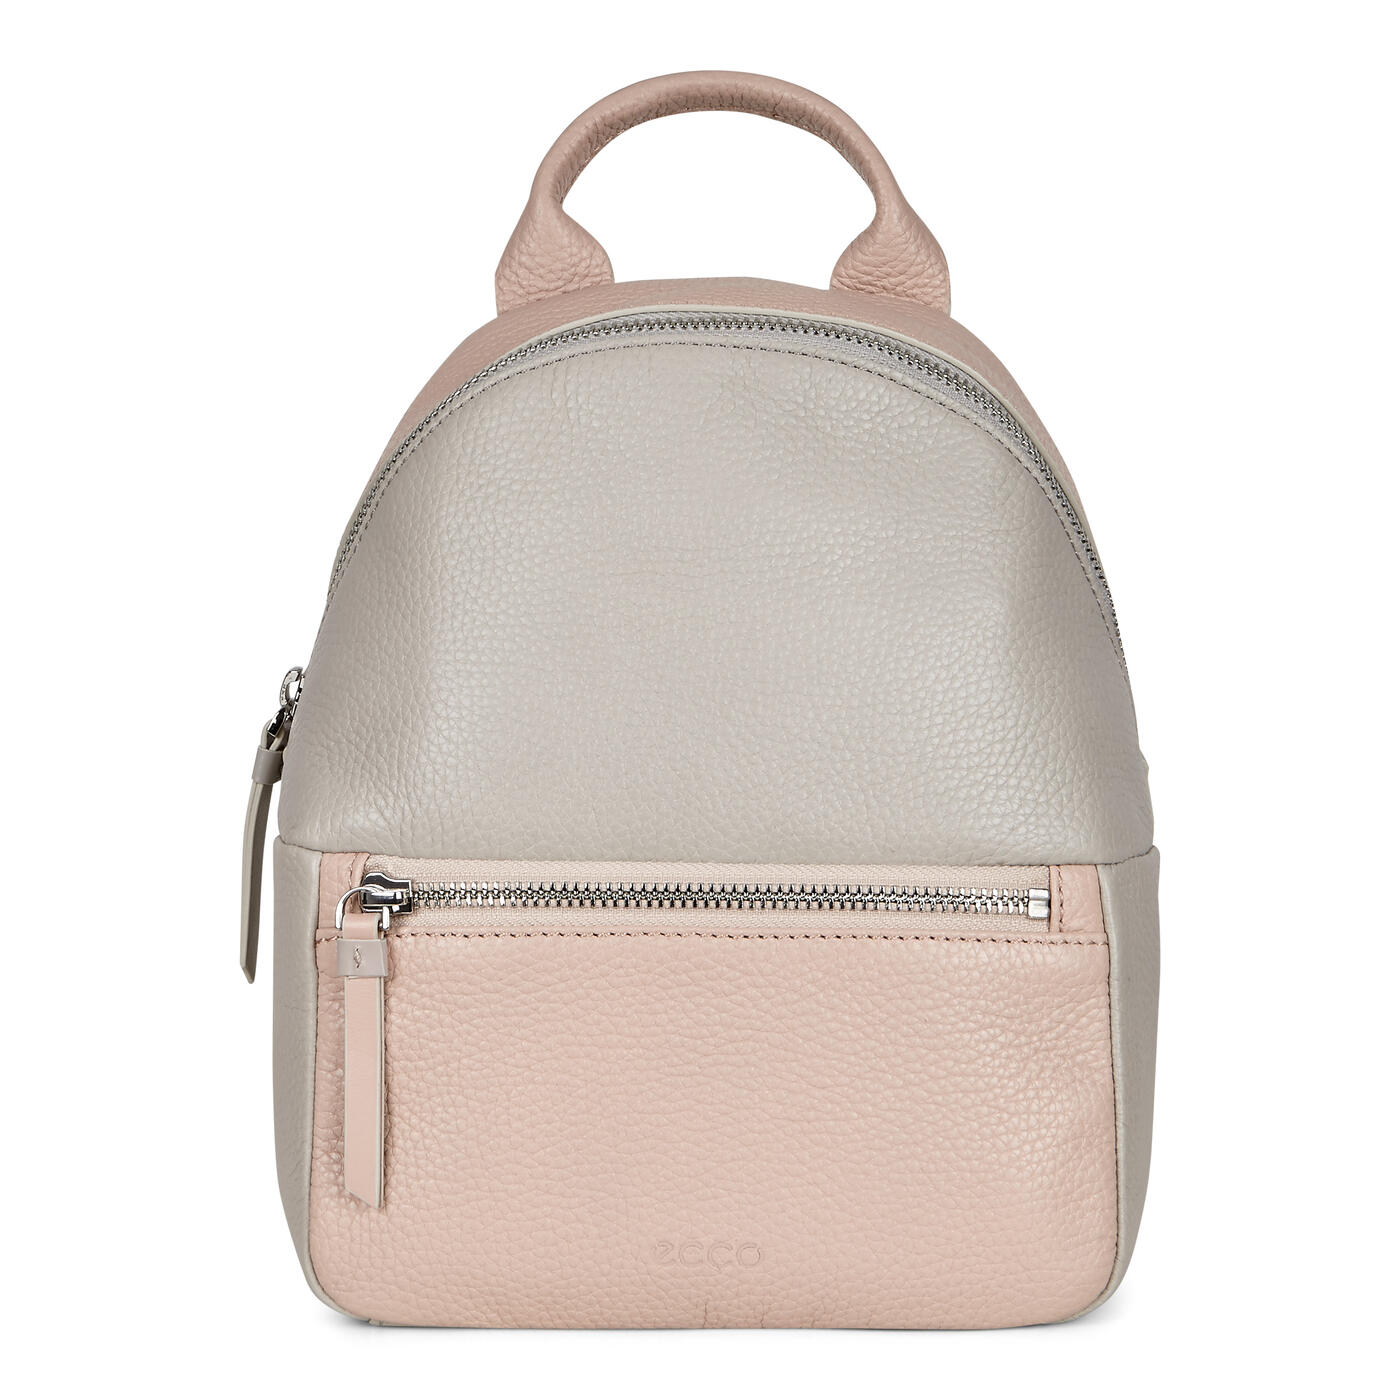 ECCO SP 3 Mini Women's Leather Backpack | ECCO® Shoes